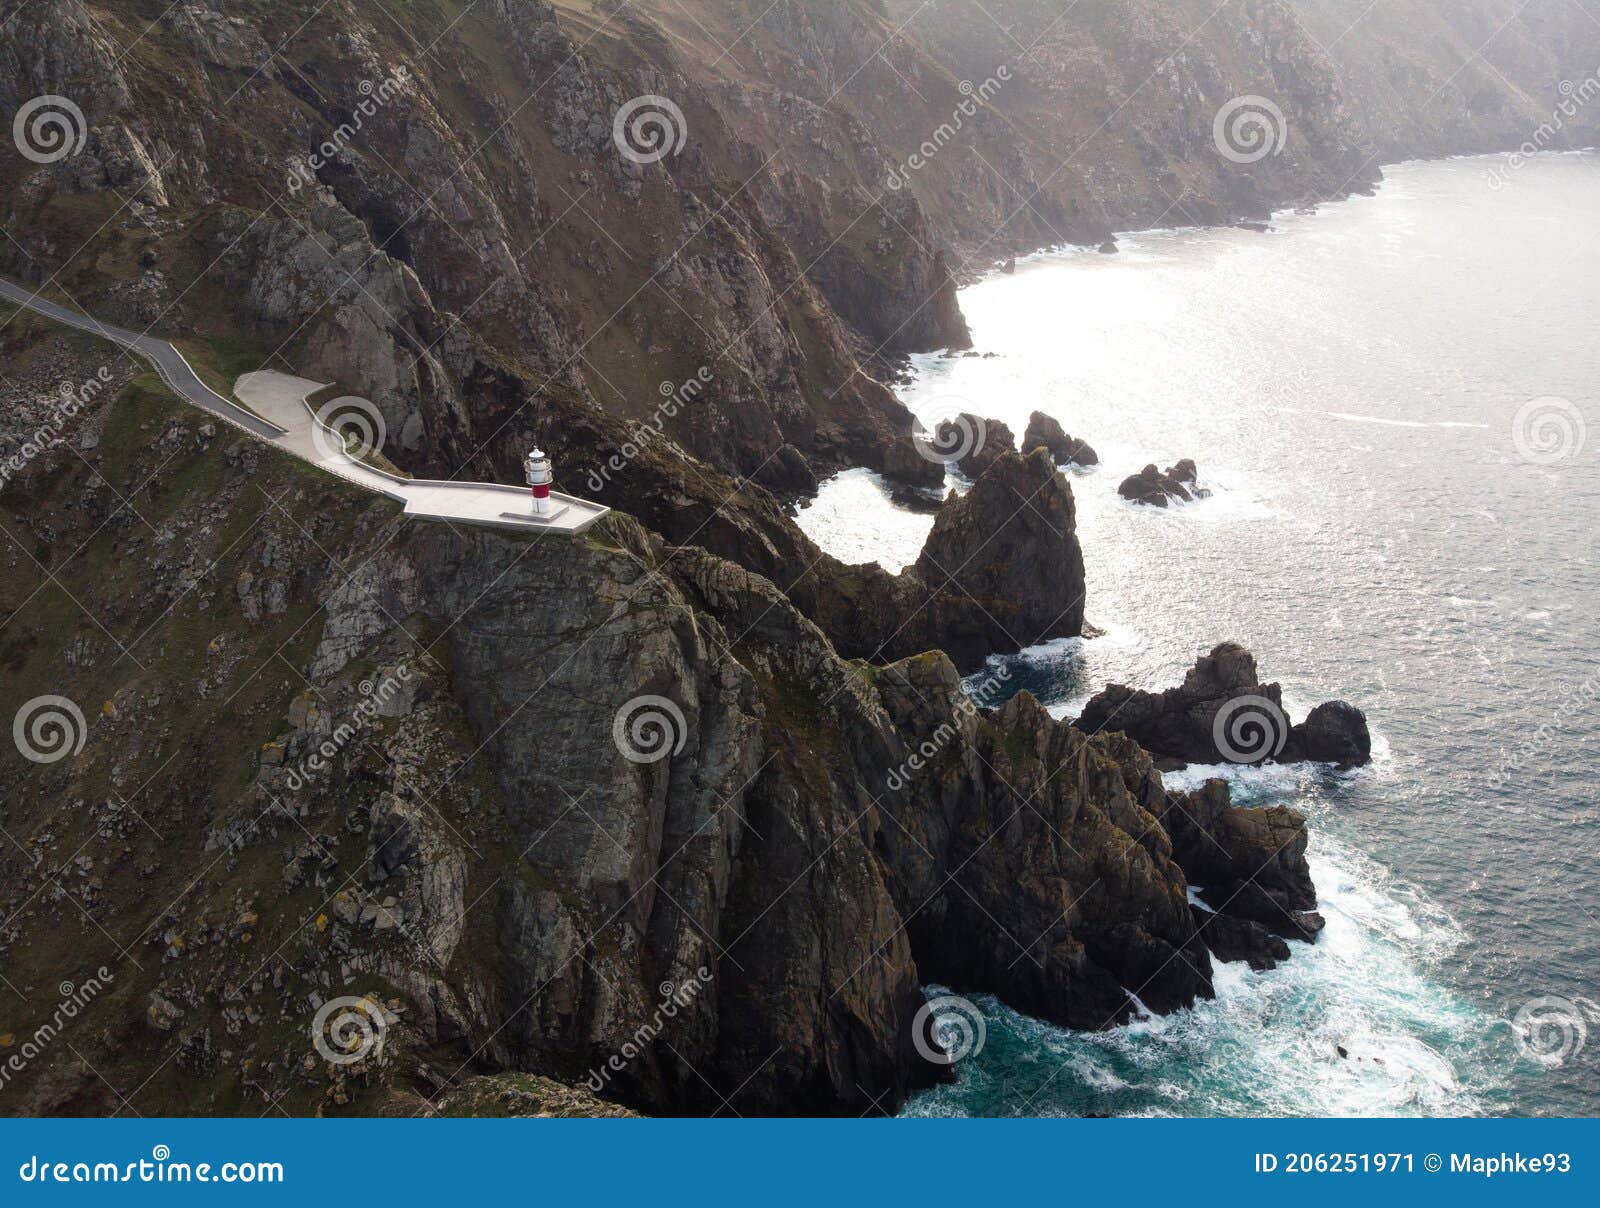 aerial panorama of cabo ortegal lighthouse on steep rocky cliff atlantic ocean bay of biscay carino cape galicia spain